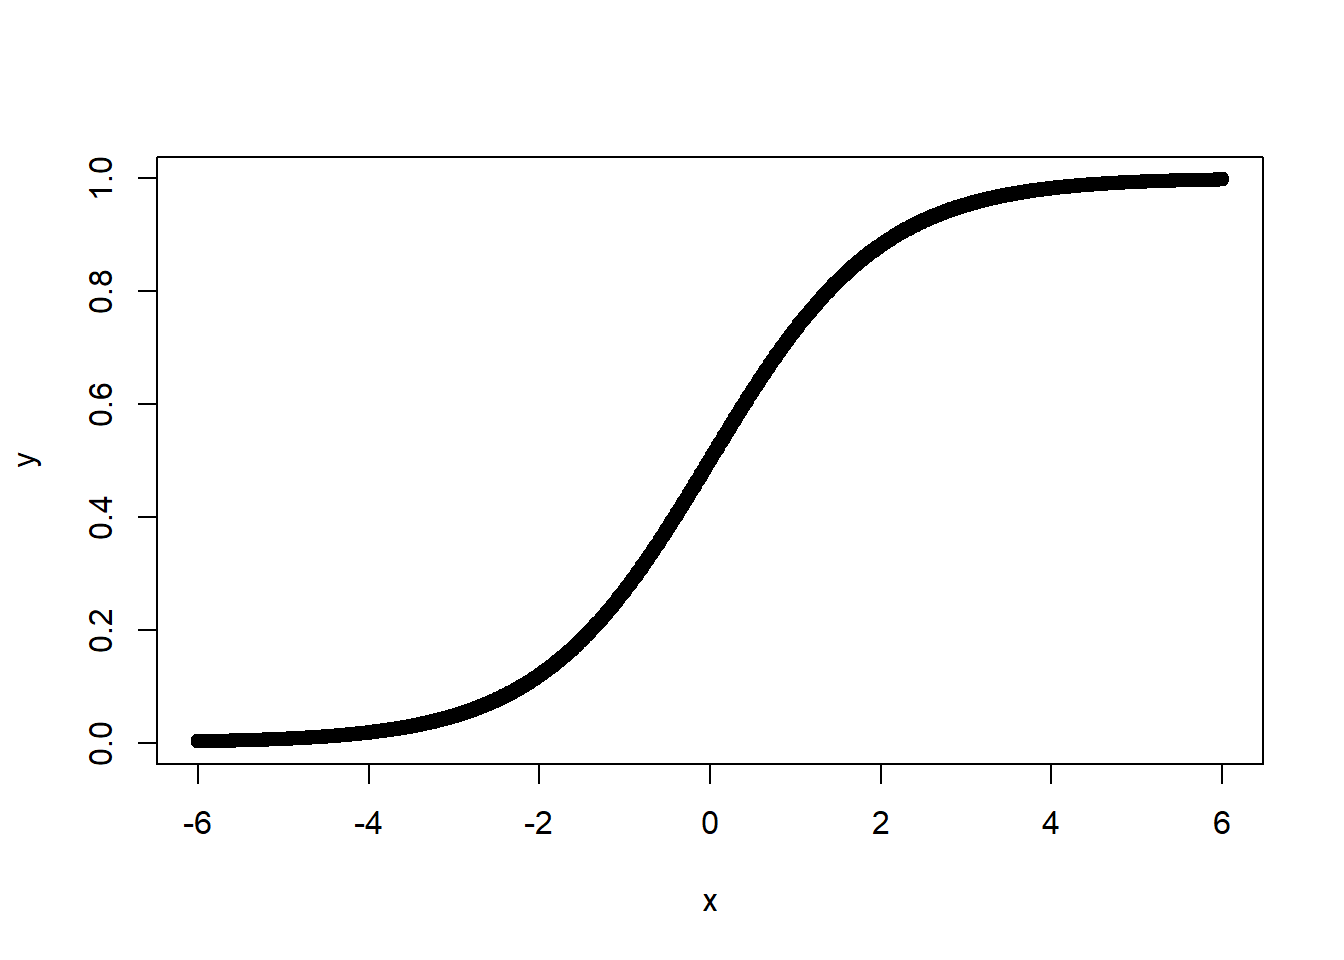 Predicted Probability as a Logit Function of $X$